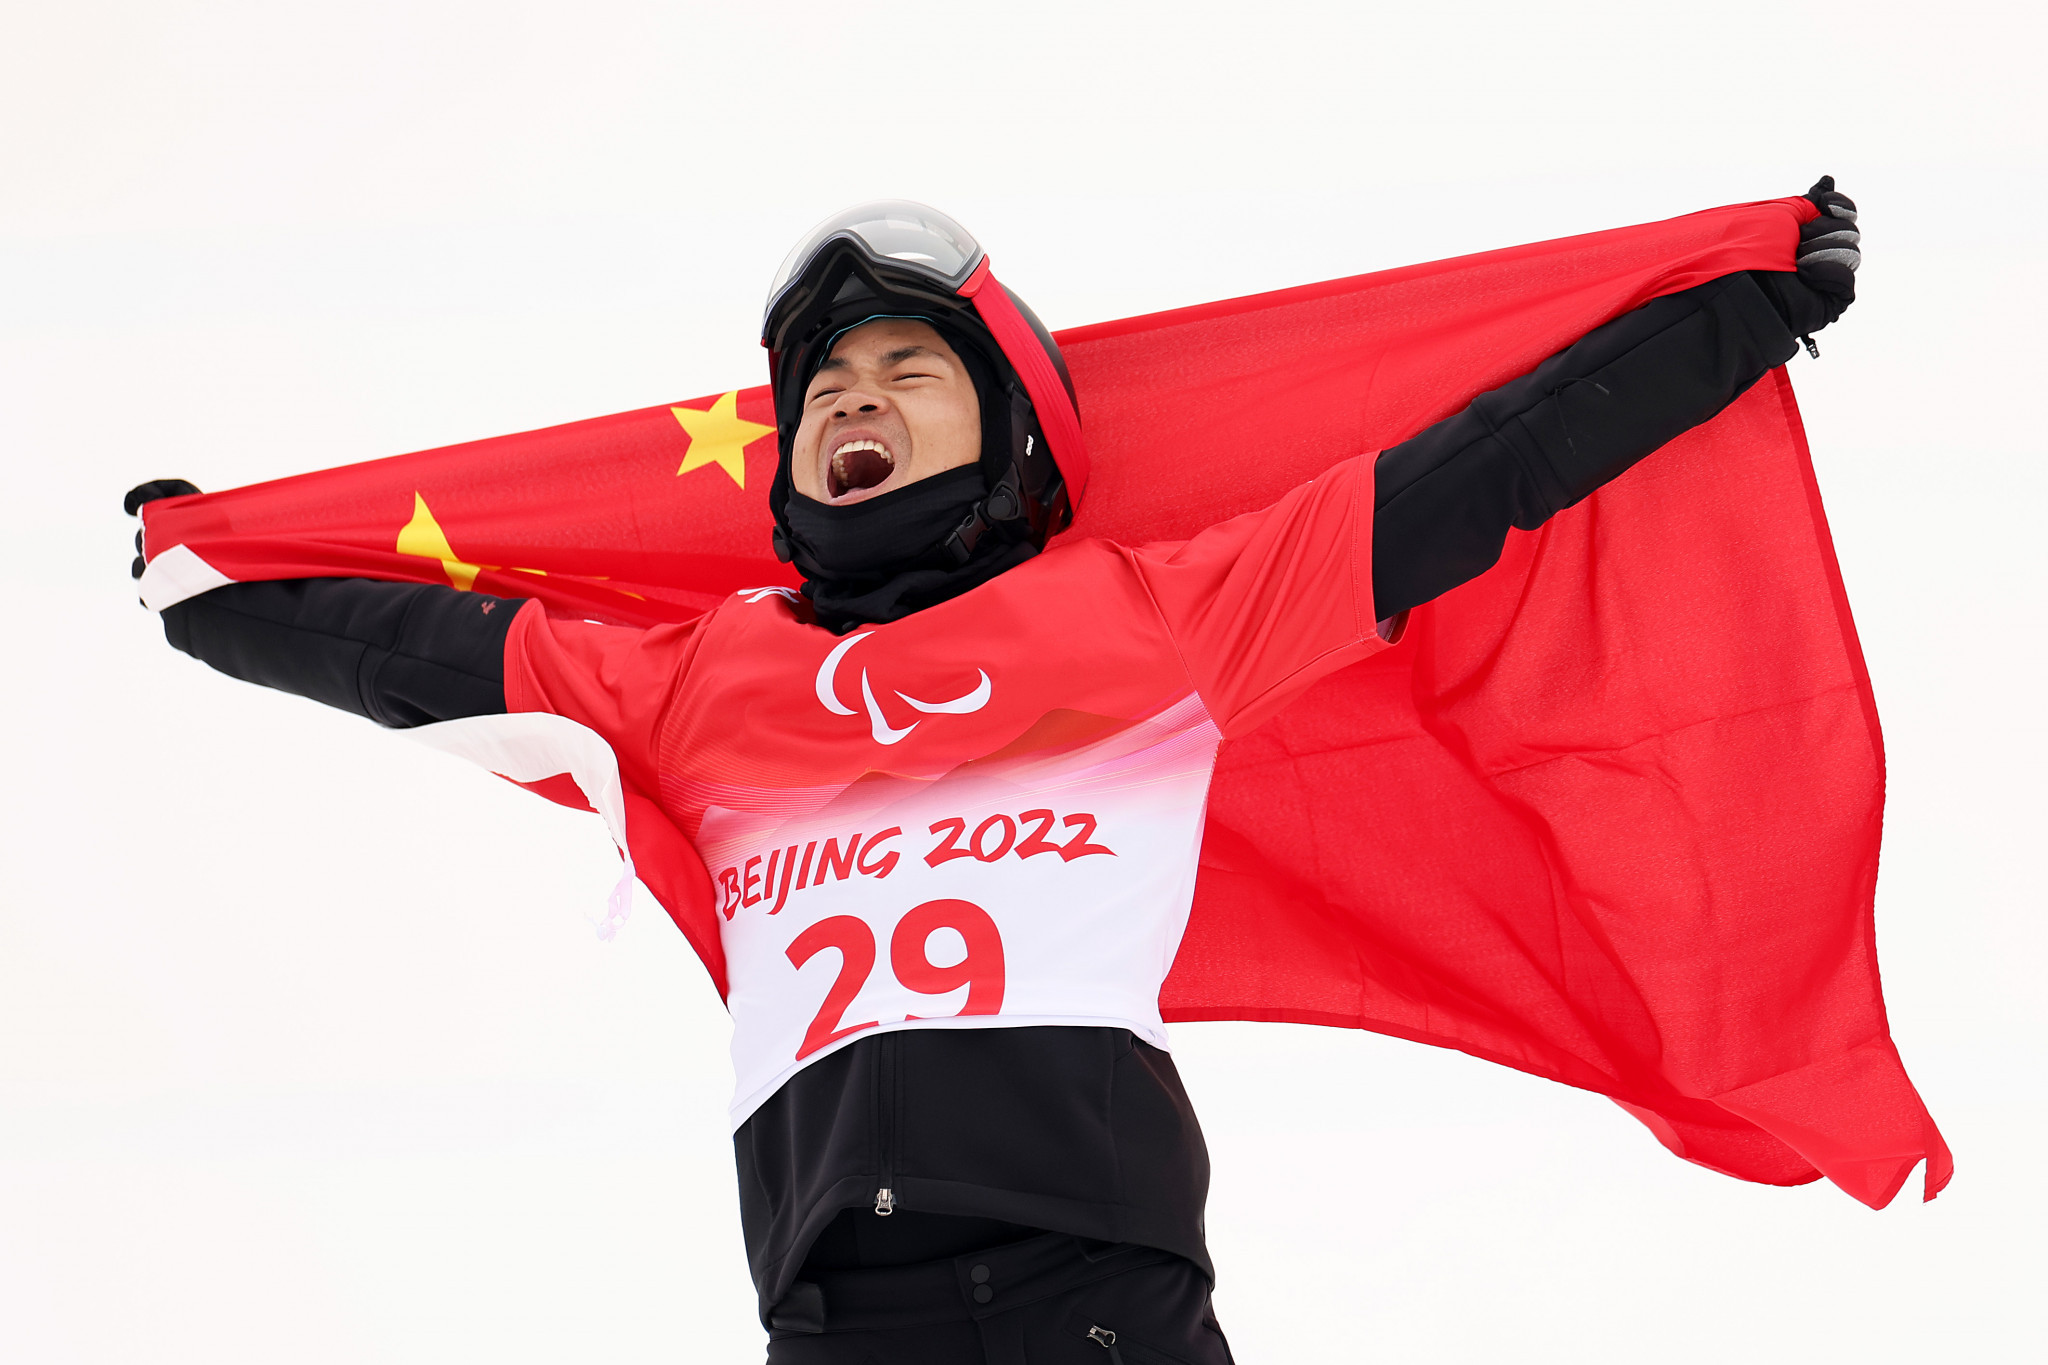 Wu and Sun continue China's Beijing 2022 success in Para snowboard banked slalom